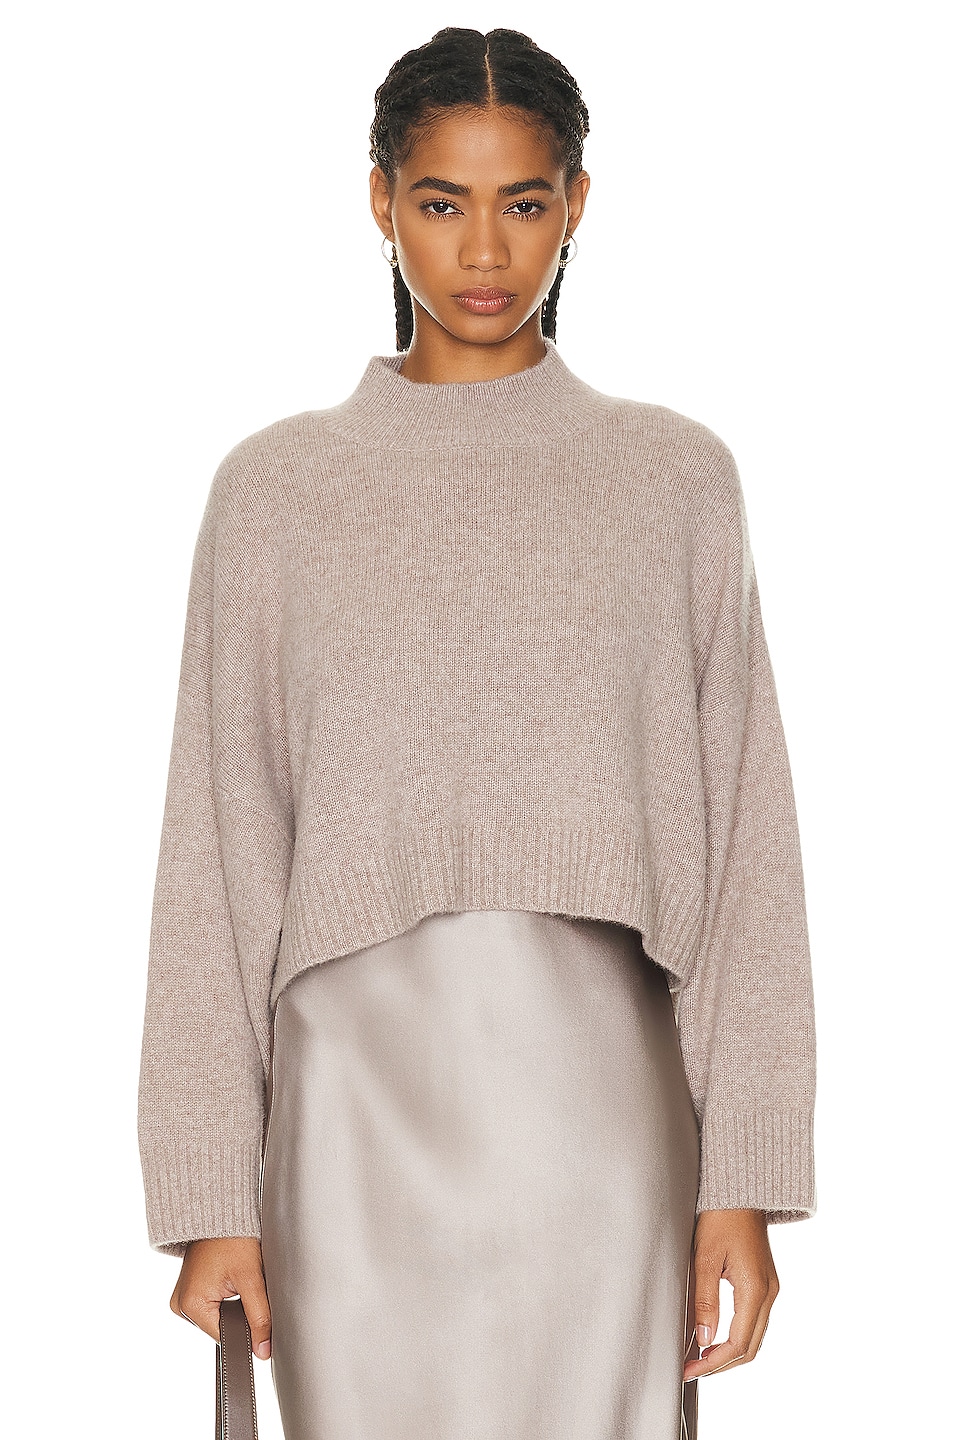 Wells Cashmere Sweater in Taupe